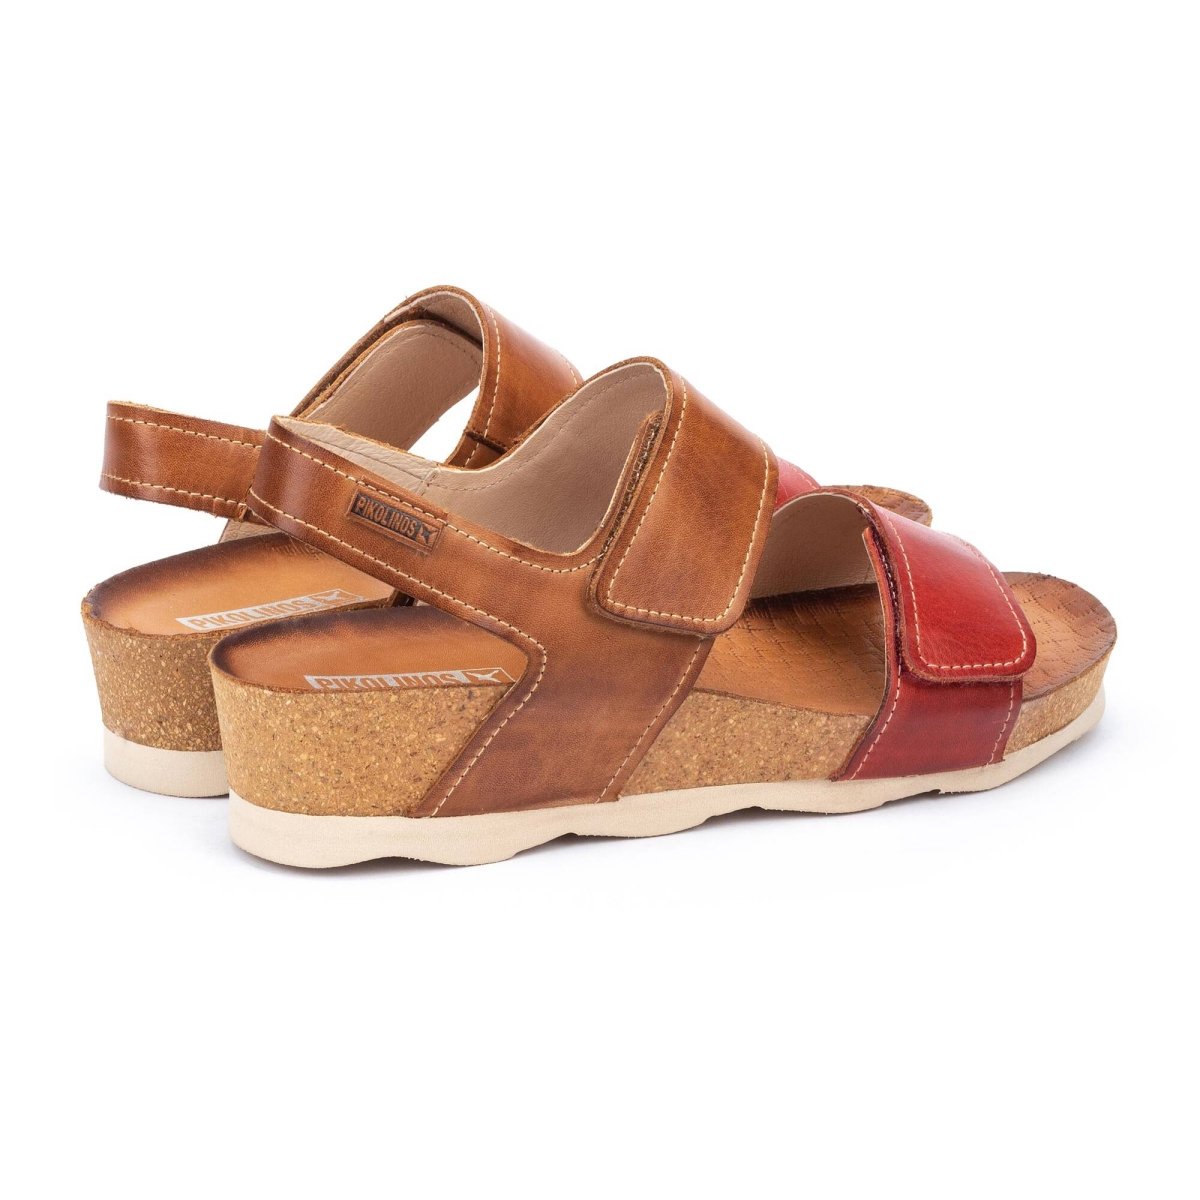 PIKOLINOS MAHON W9E-0503C1 WOMEN'S WEDGE SANDAL IN CORAL - TLW Shoes